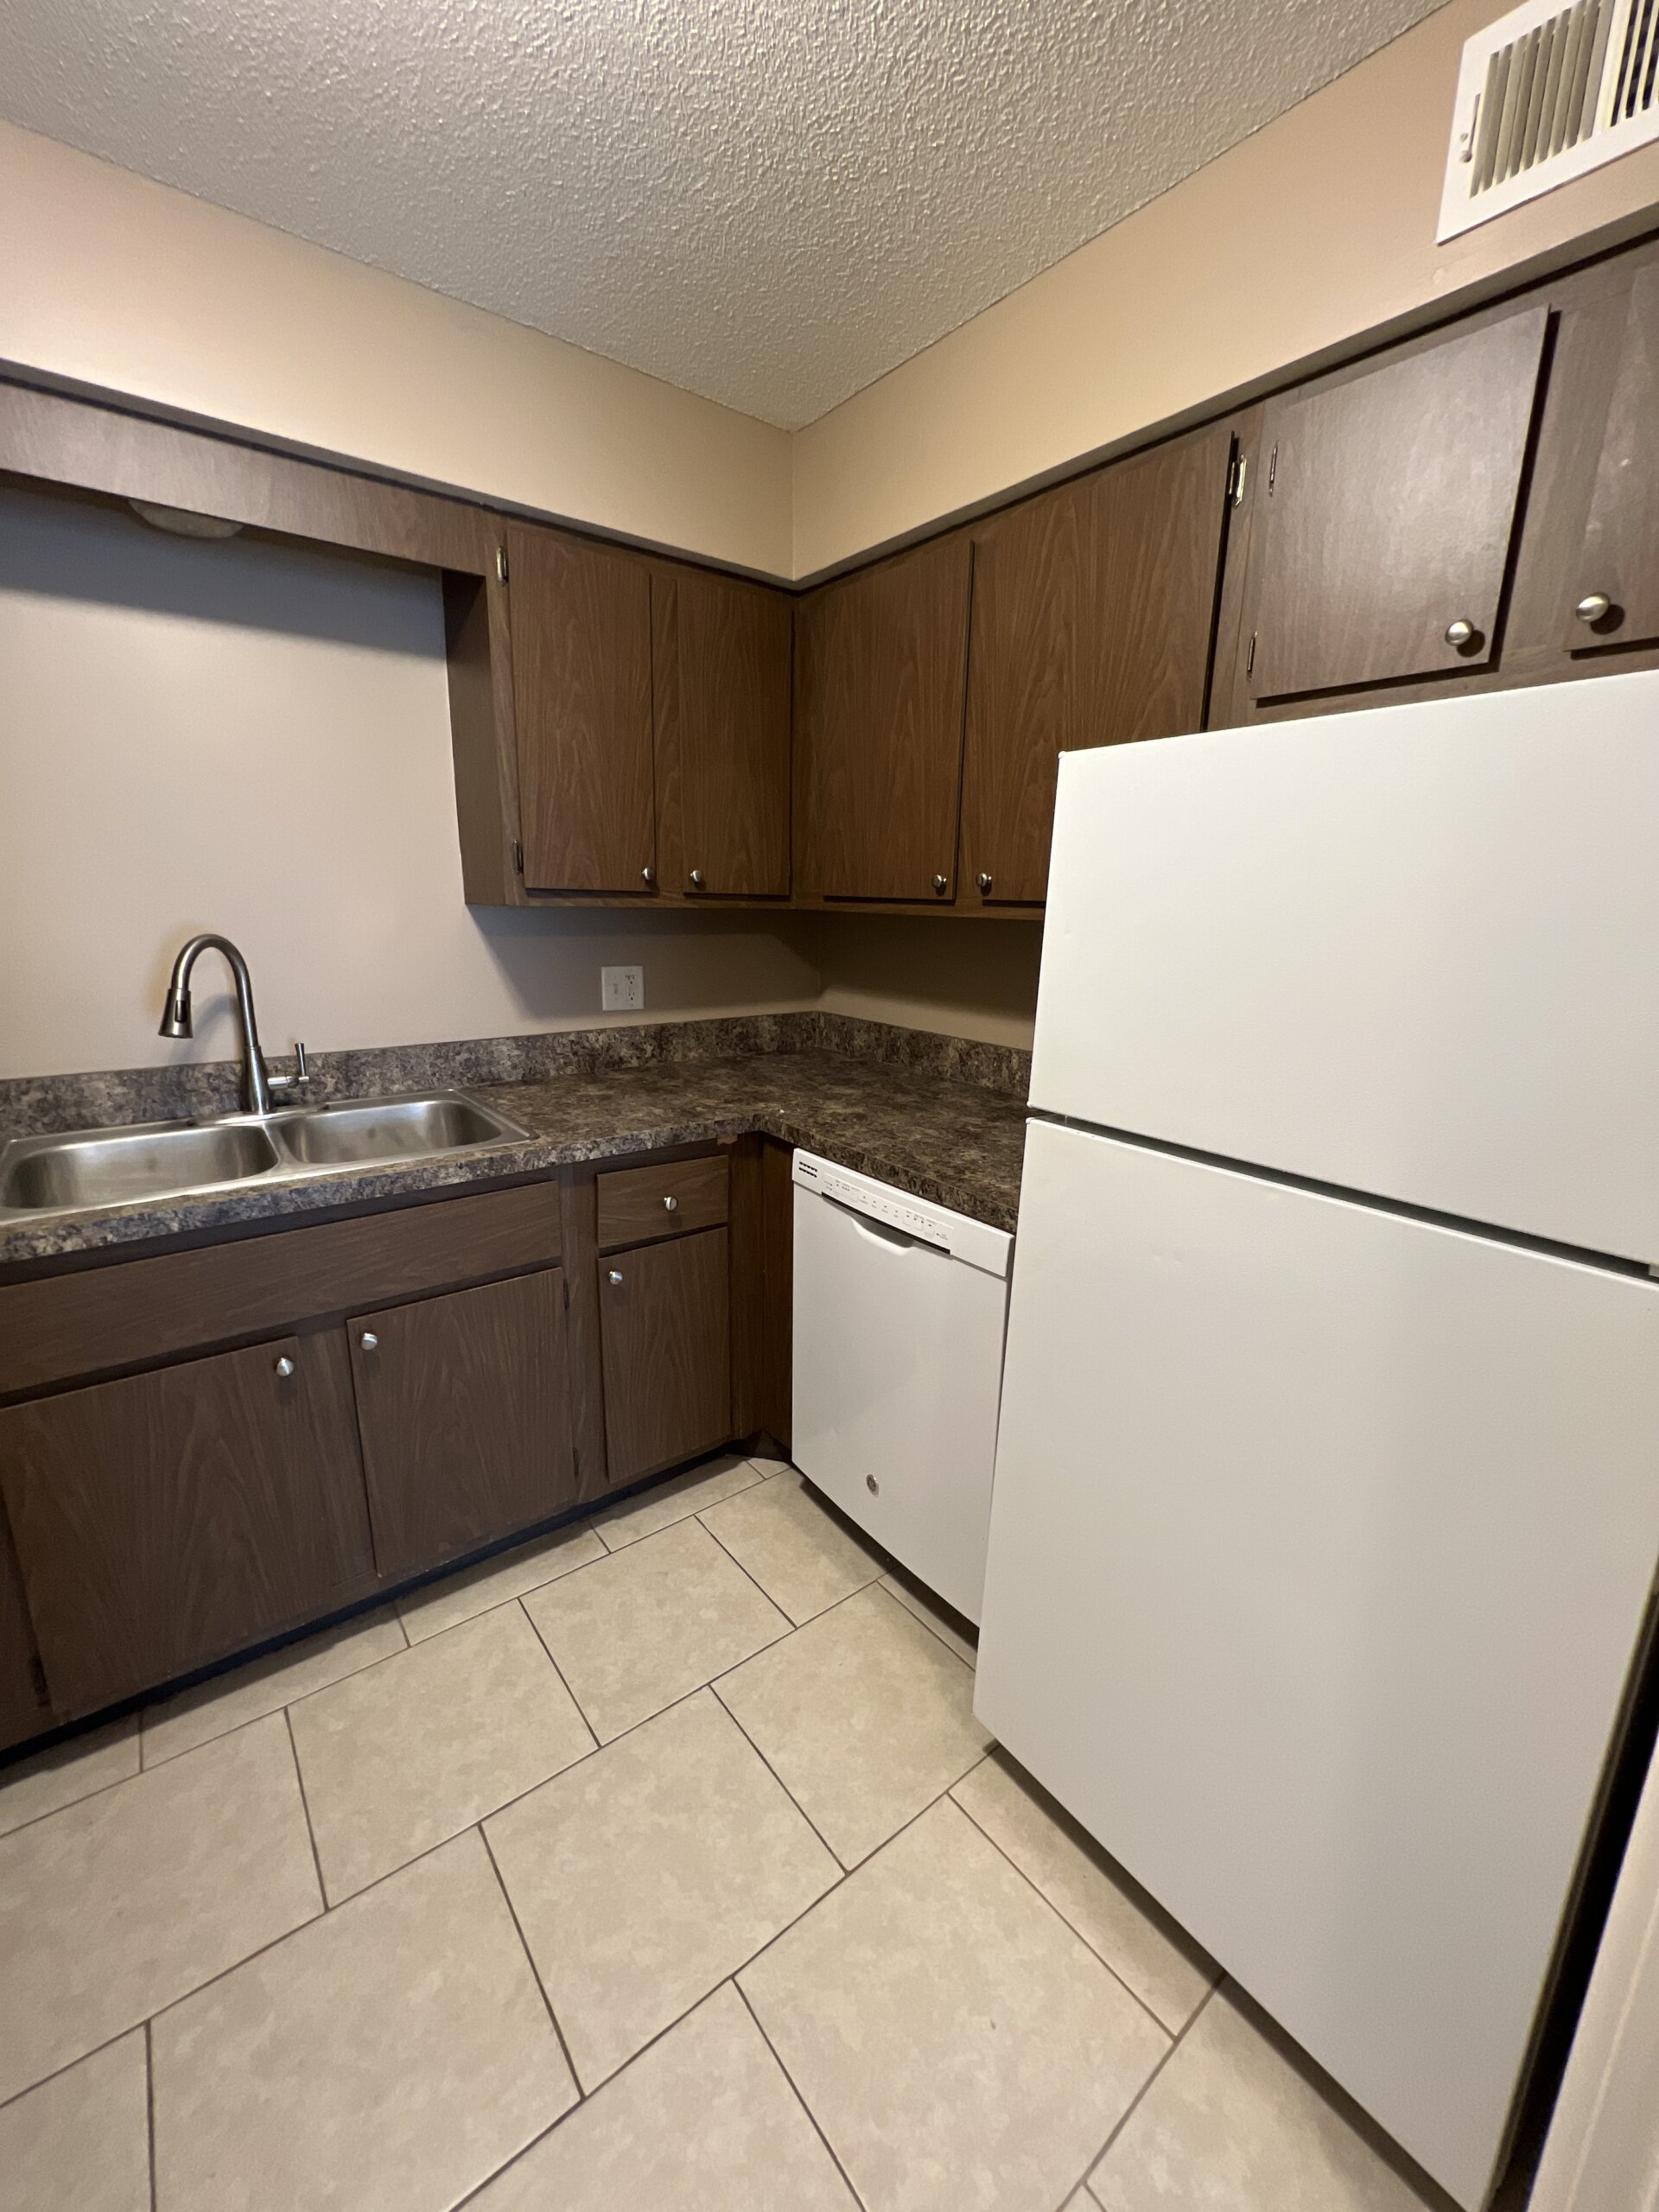 The Georgetown Apartments Kitchen